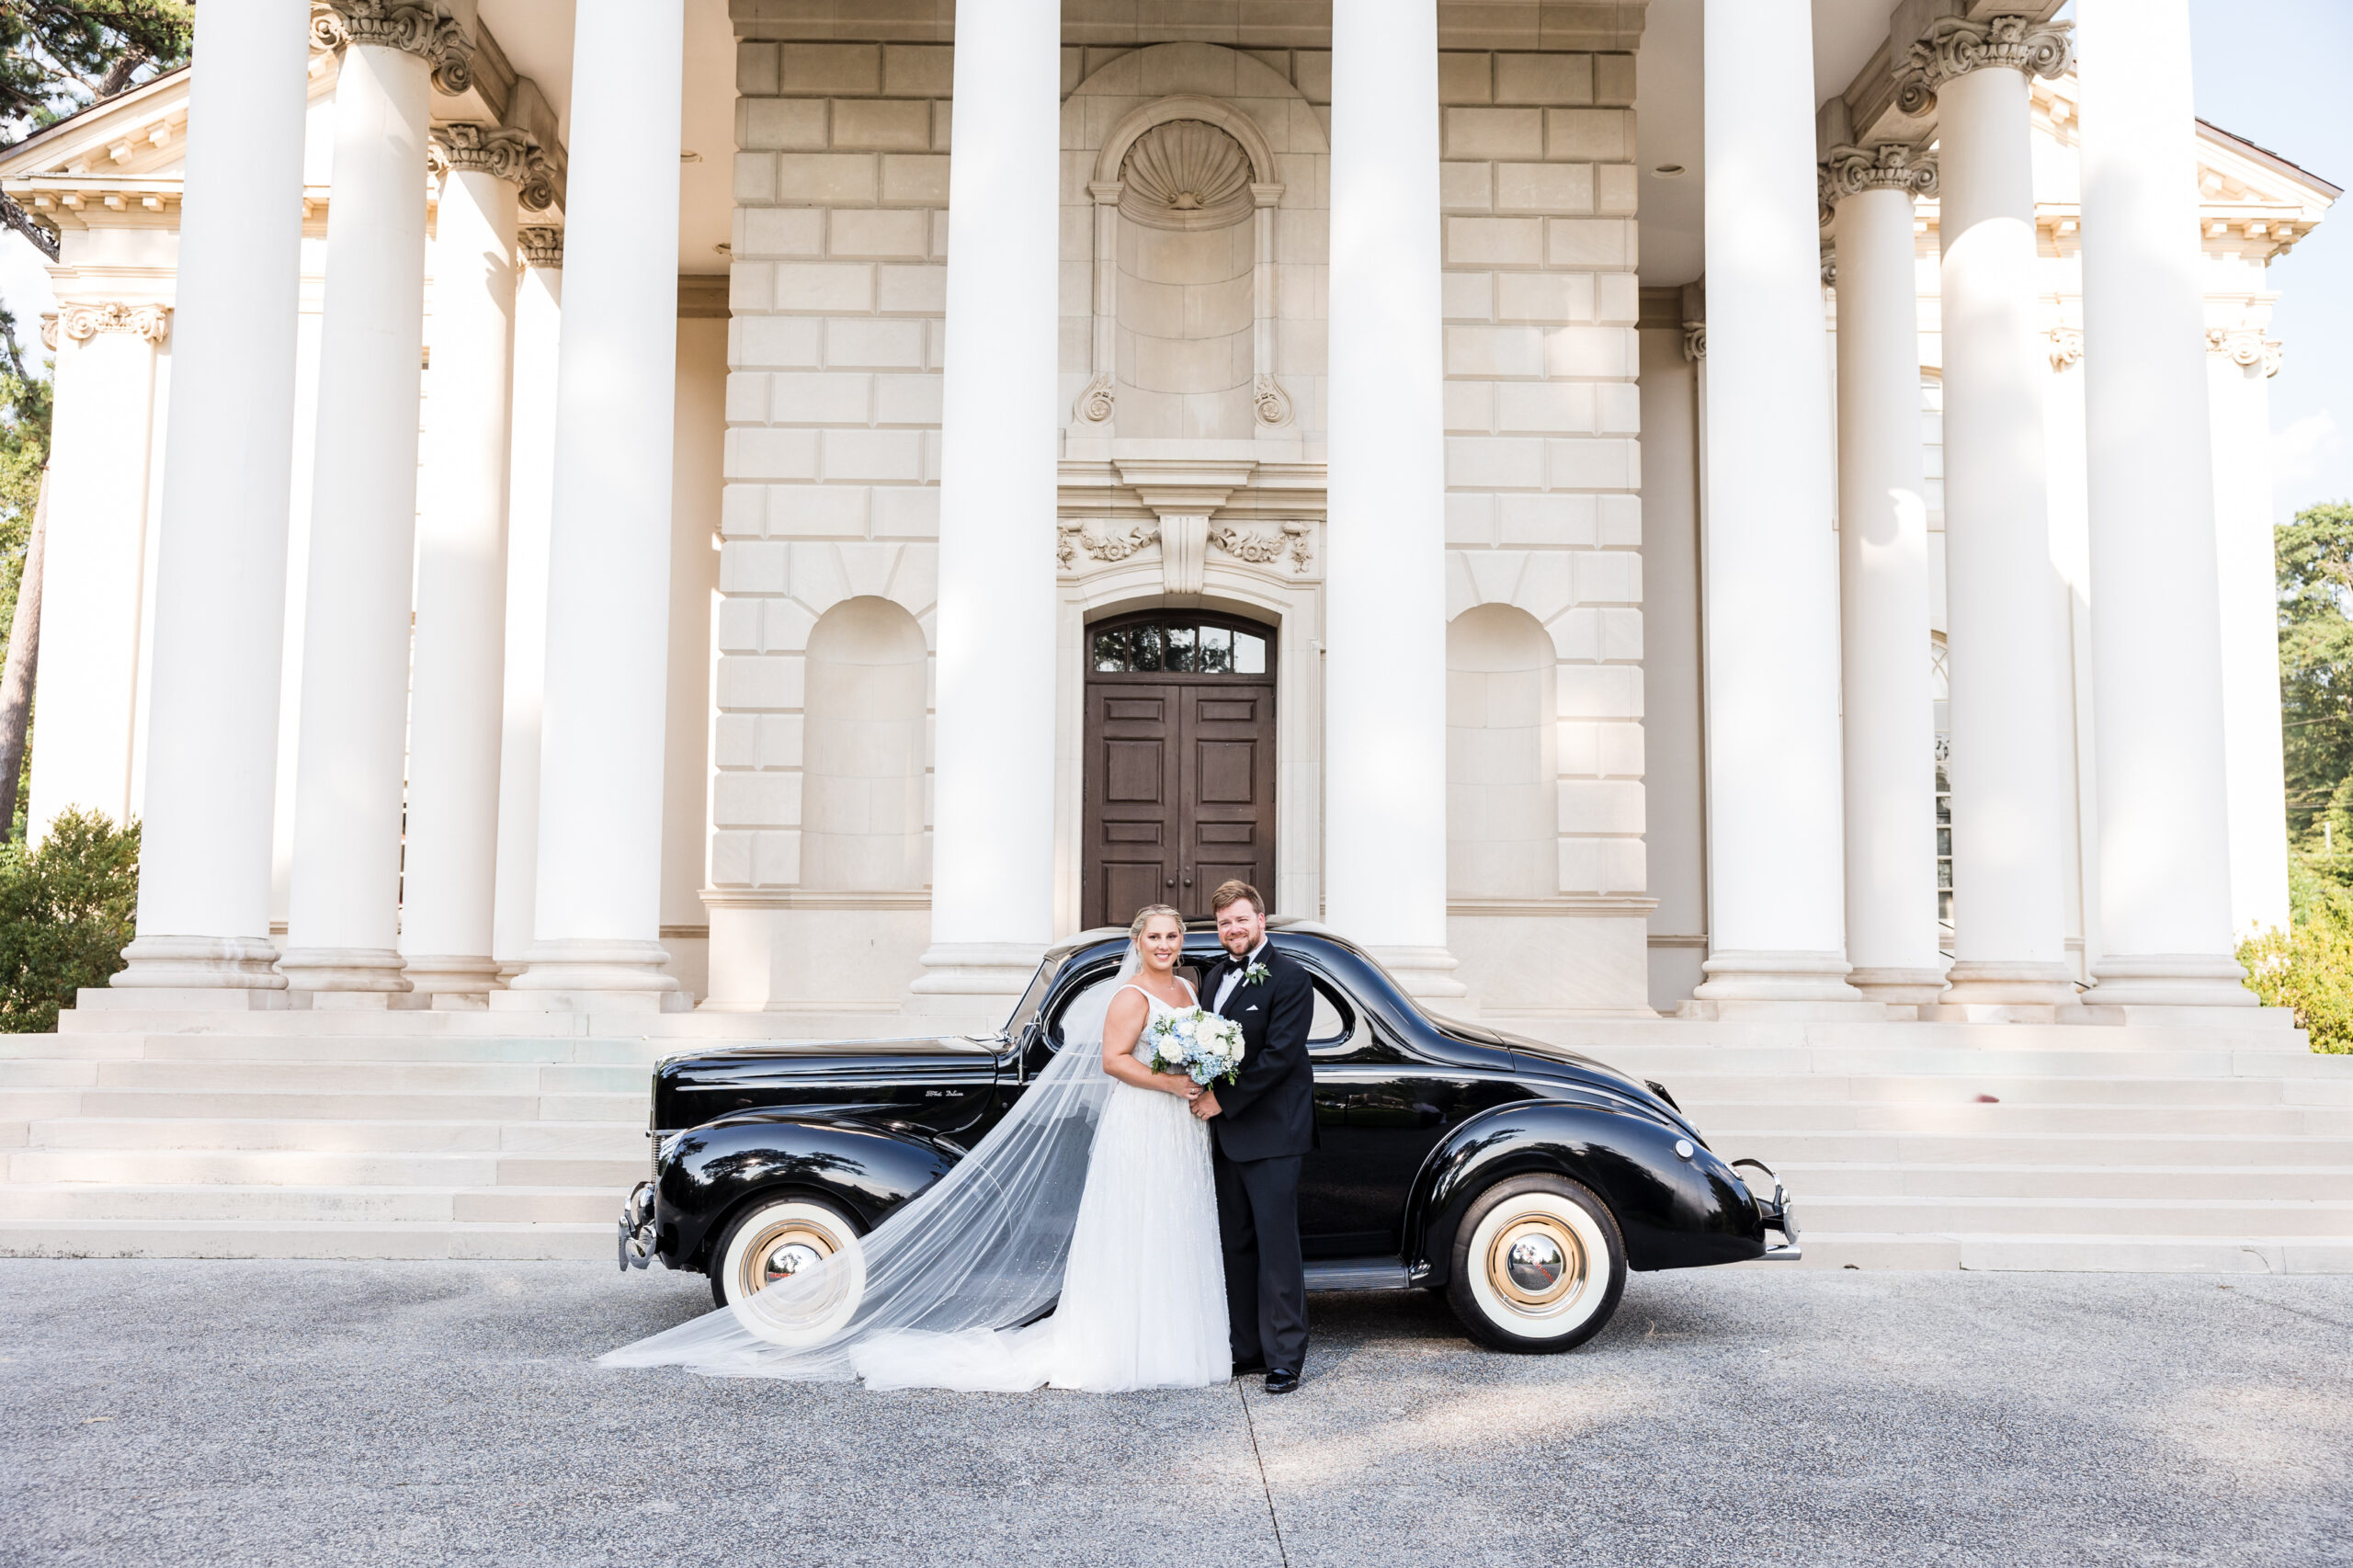 Bride and Groom pose for a photo in front of the vintage bridal car